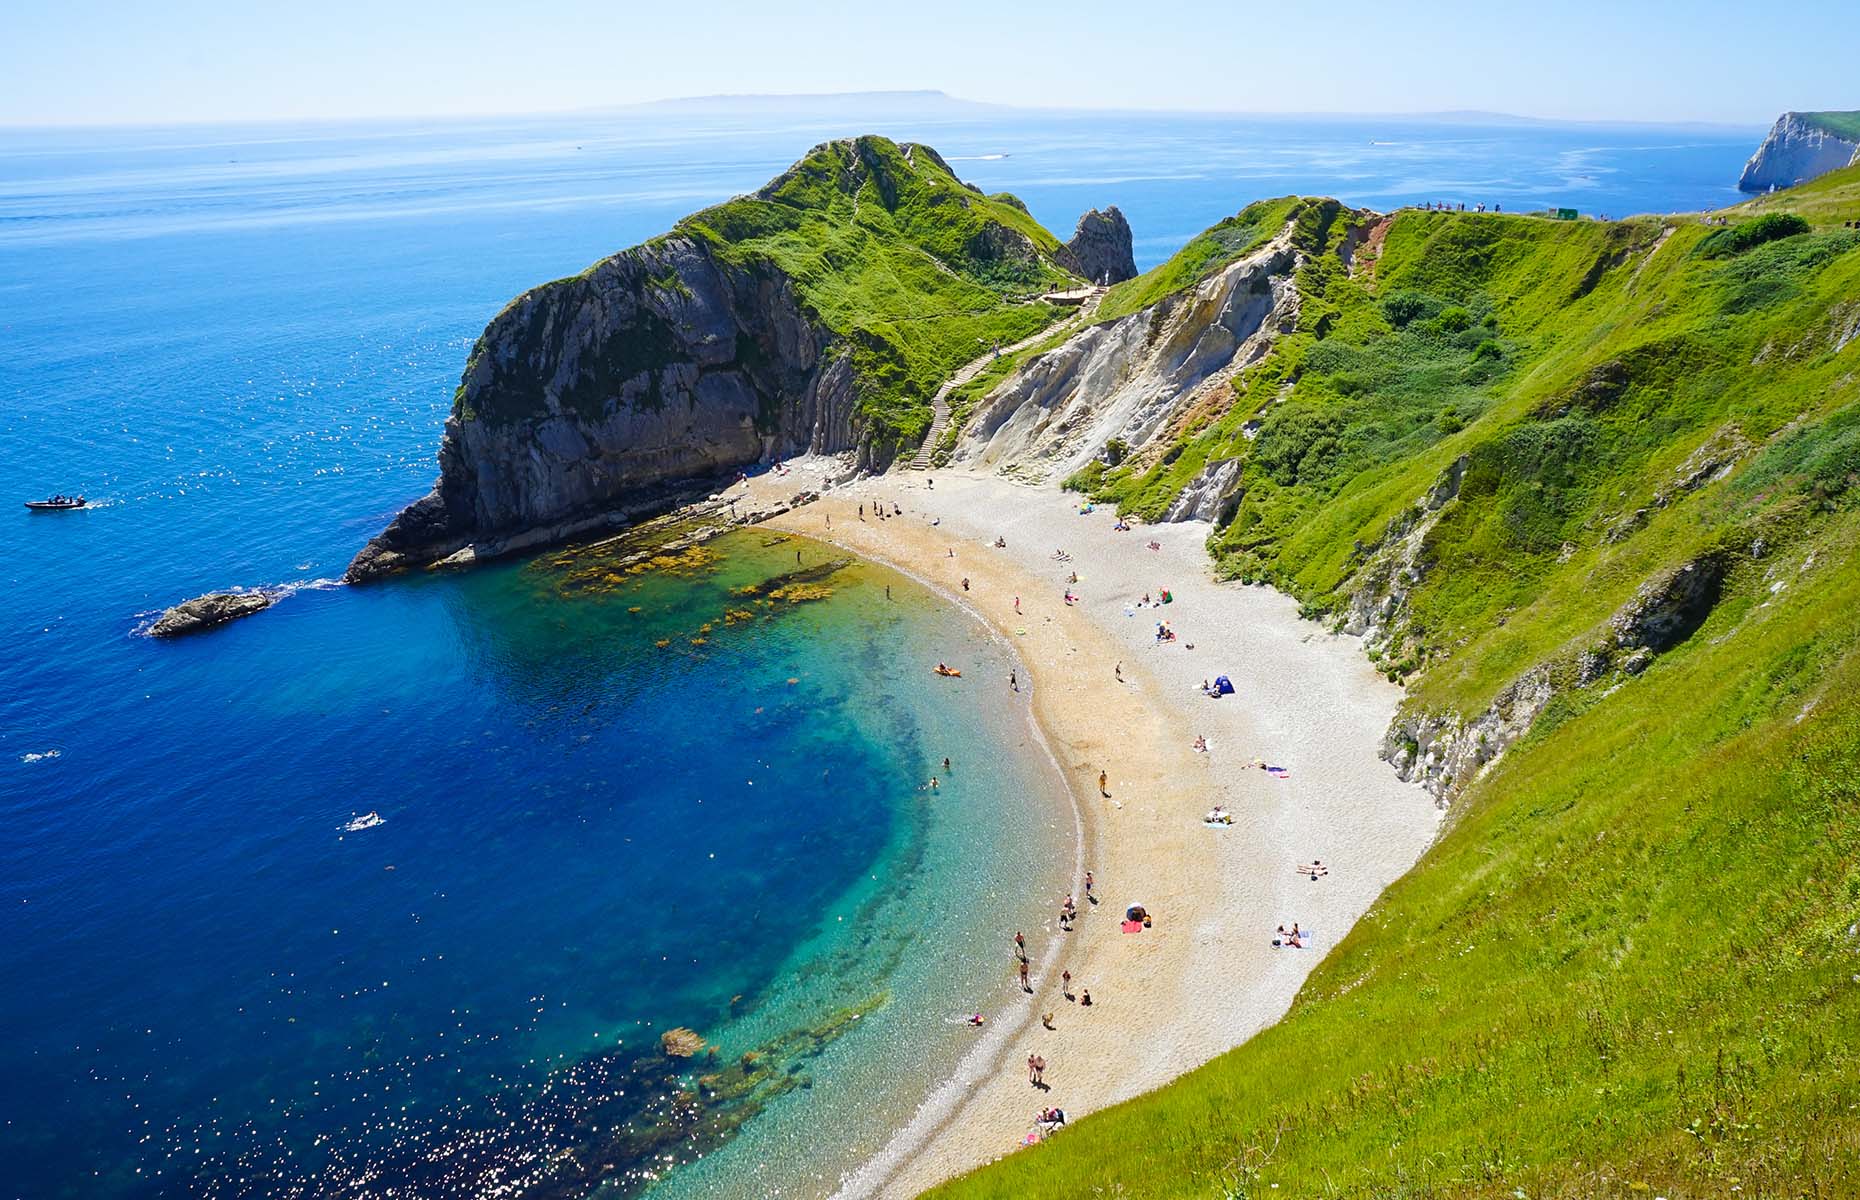 Lulworth Cove in Dorset (Image: Inspired By Maps/Shutterstock)